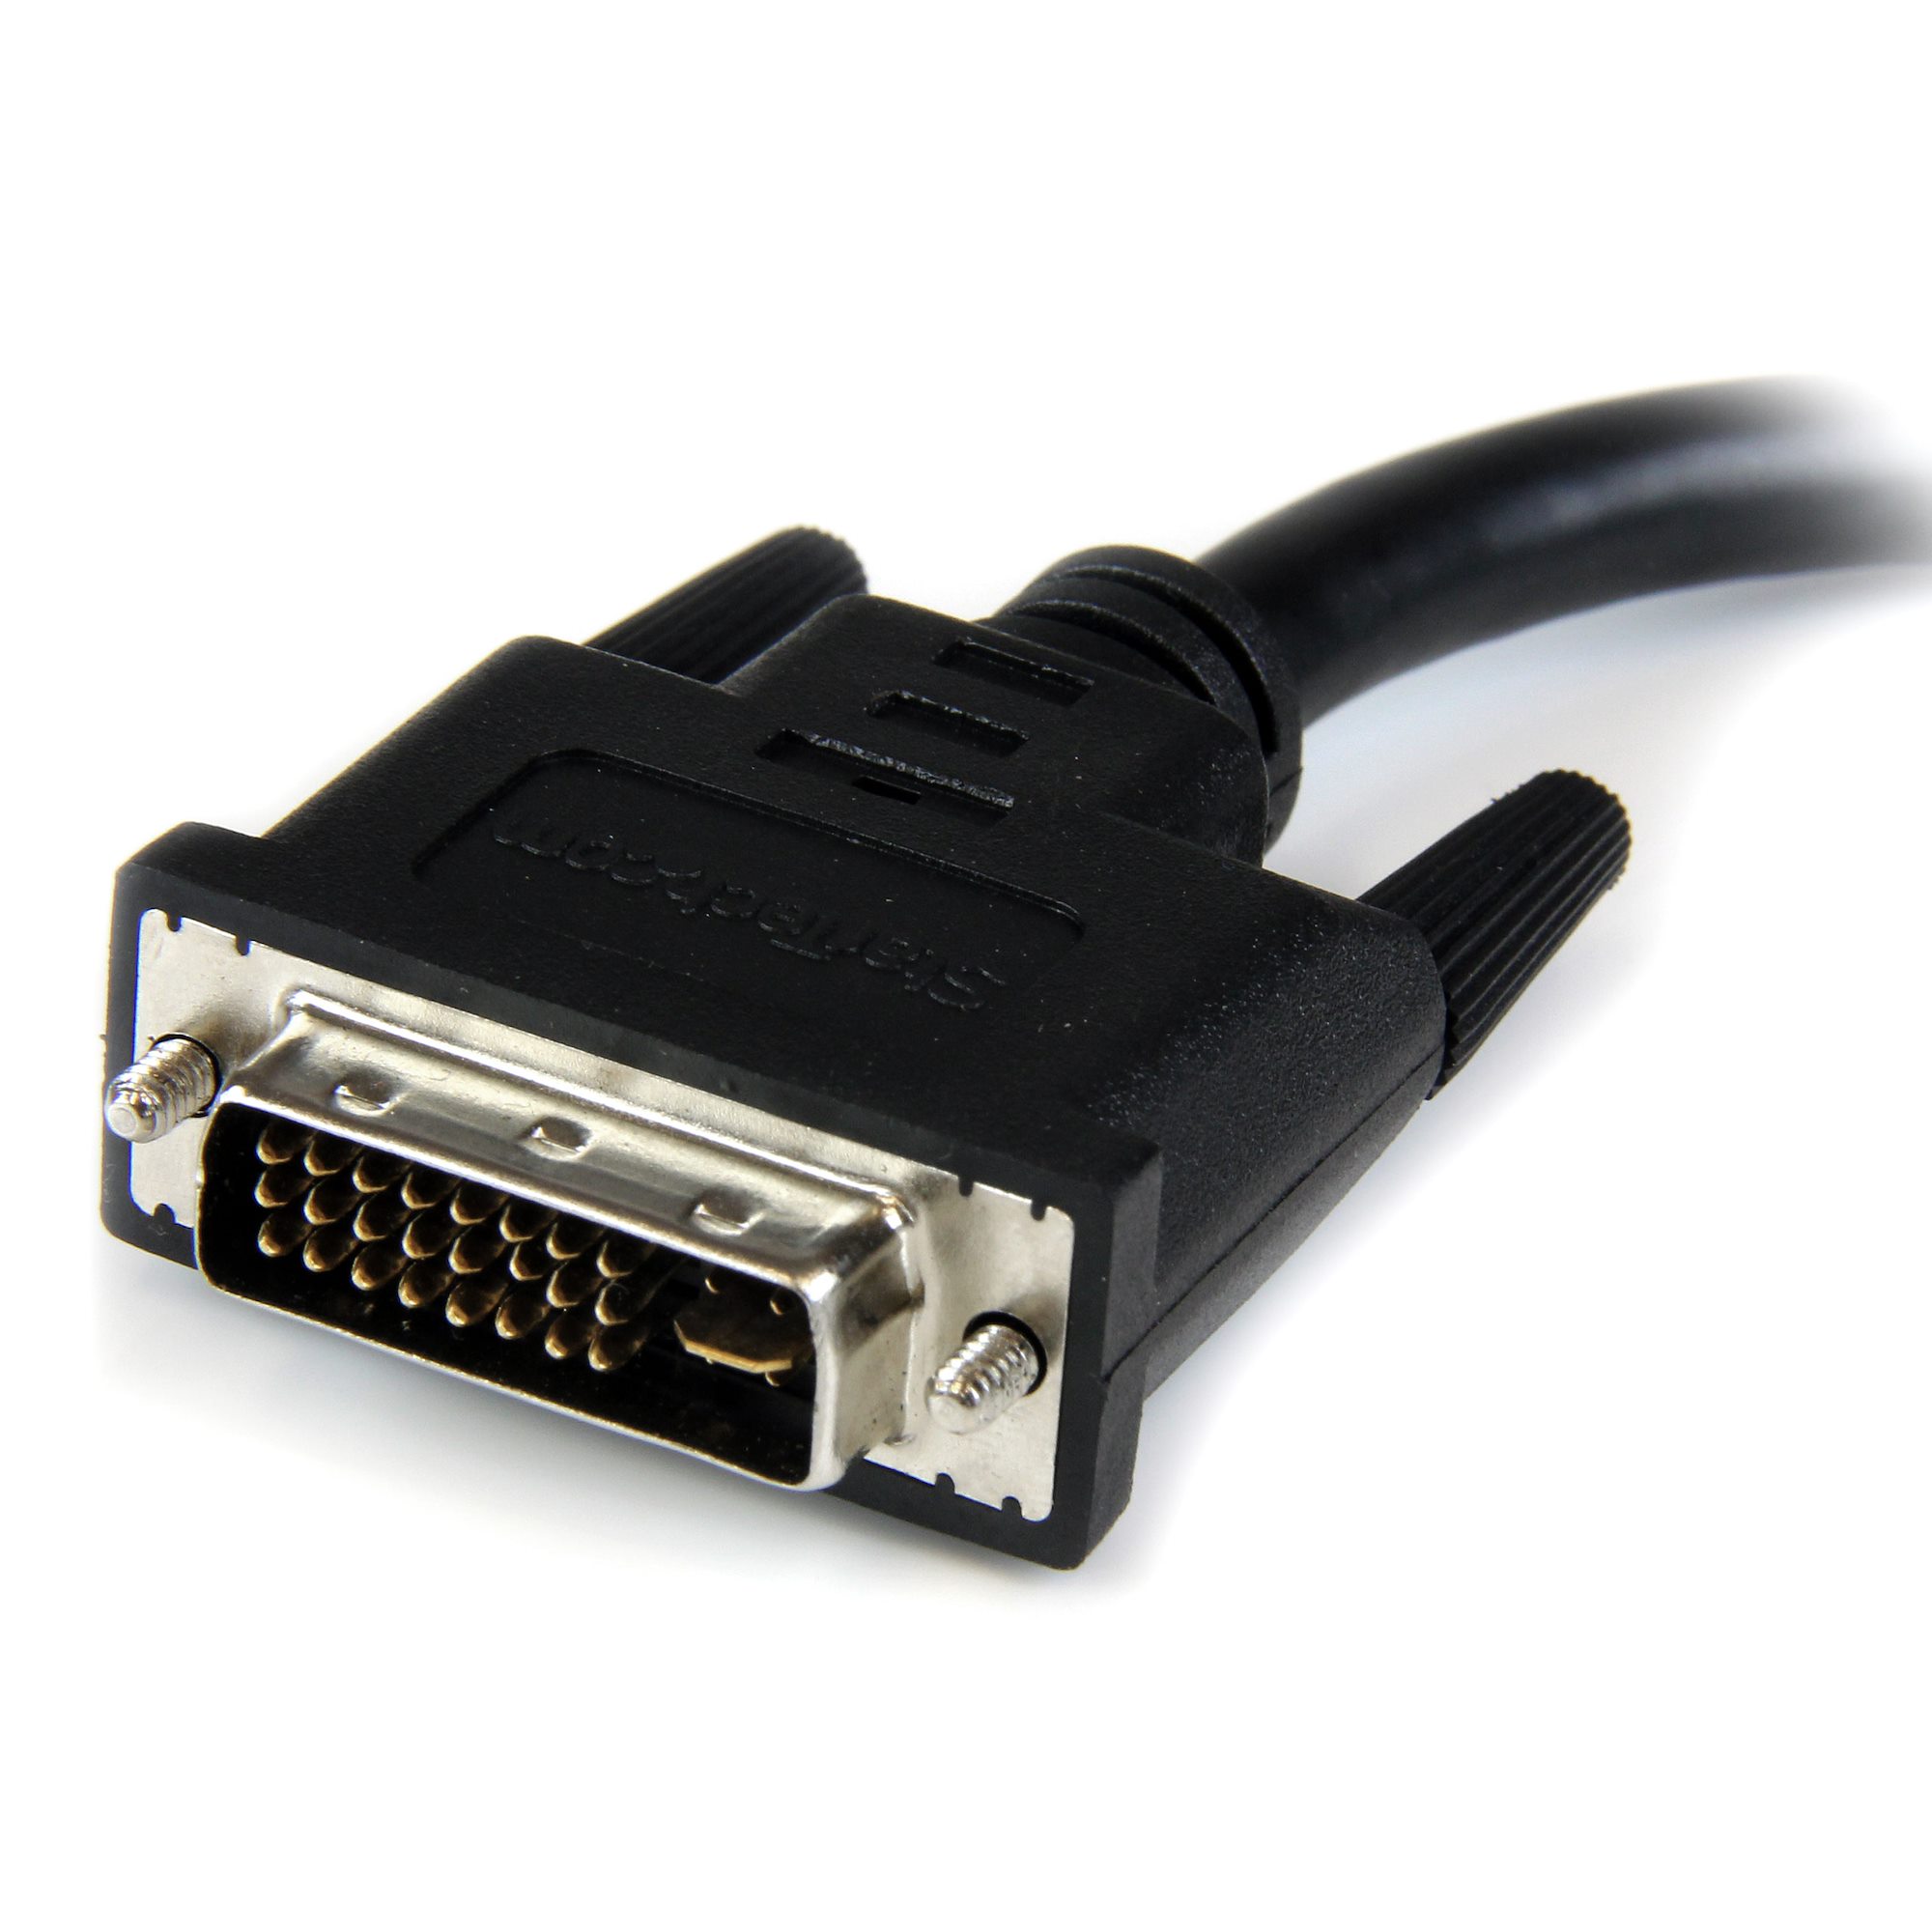 Insist Prove narrow 8in DVI to VGA Cable Adapter M/F - Video Cable Adapters | StarTech.com